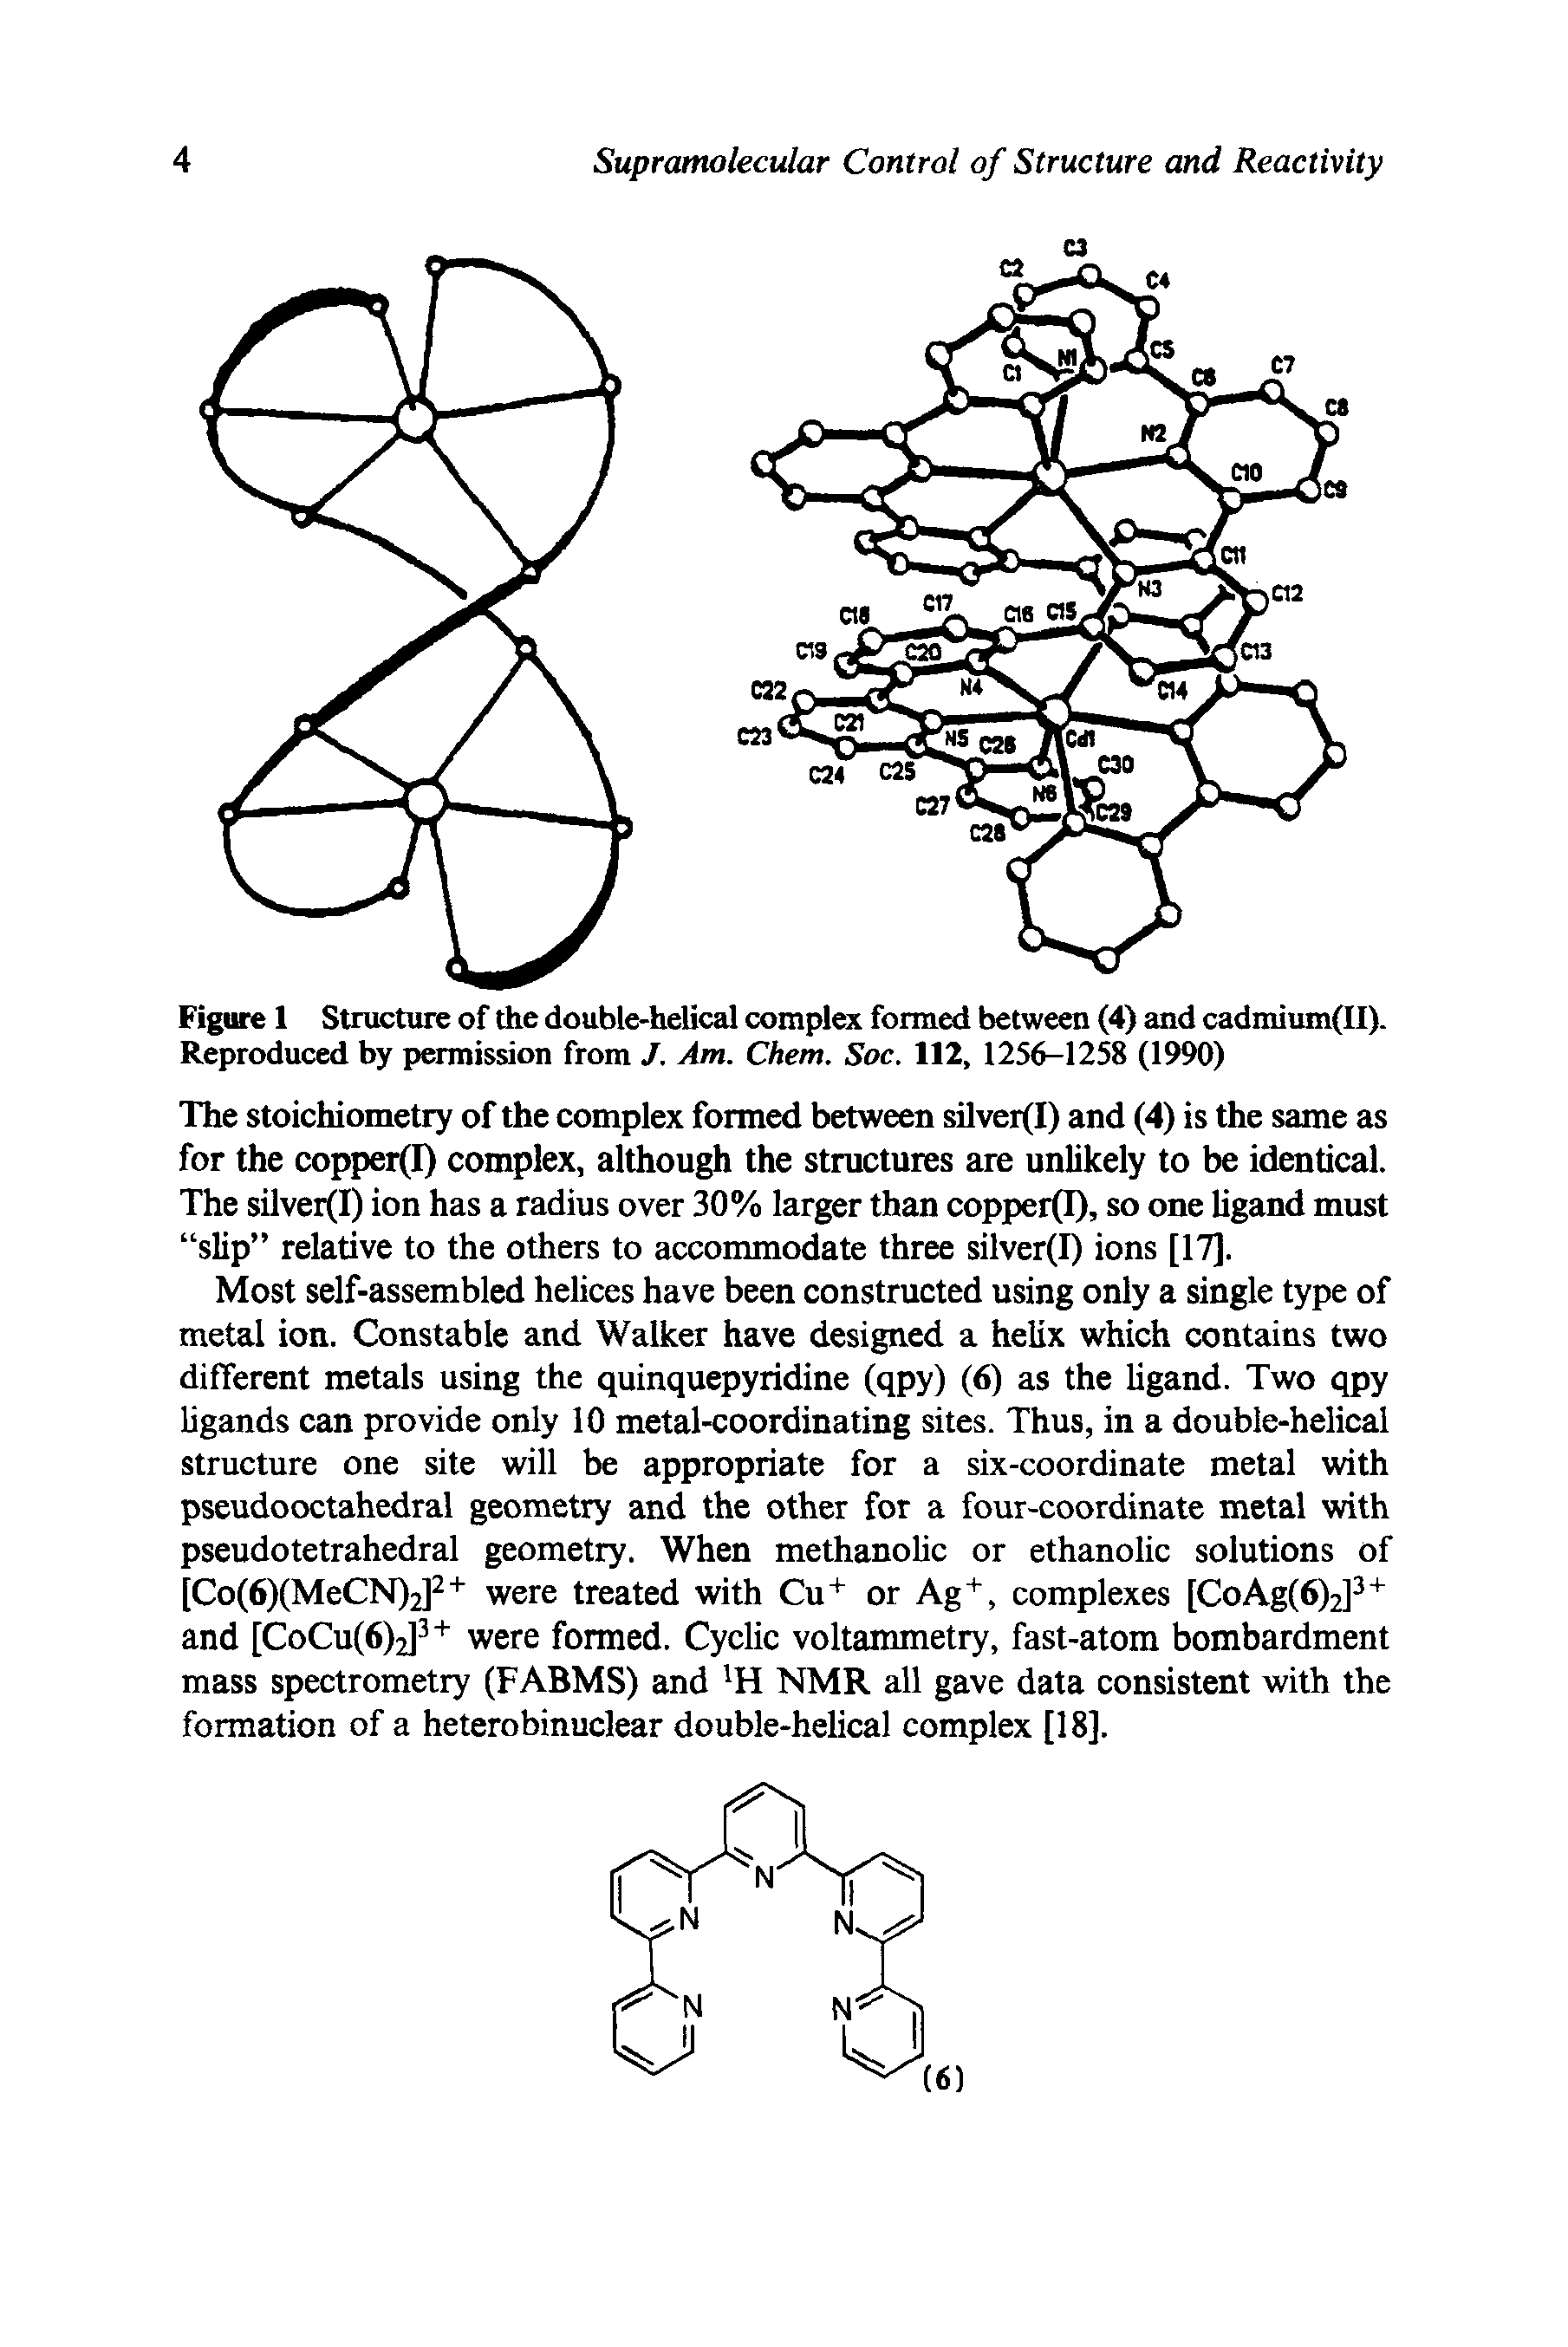 Figure 1 Structure of the double-helical complex formed between (4) and cadmium II). Reproduced by permission from J. Am. Chem. Soc. 112, 1256-1258 (1990)...